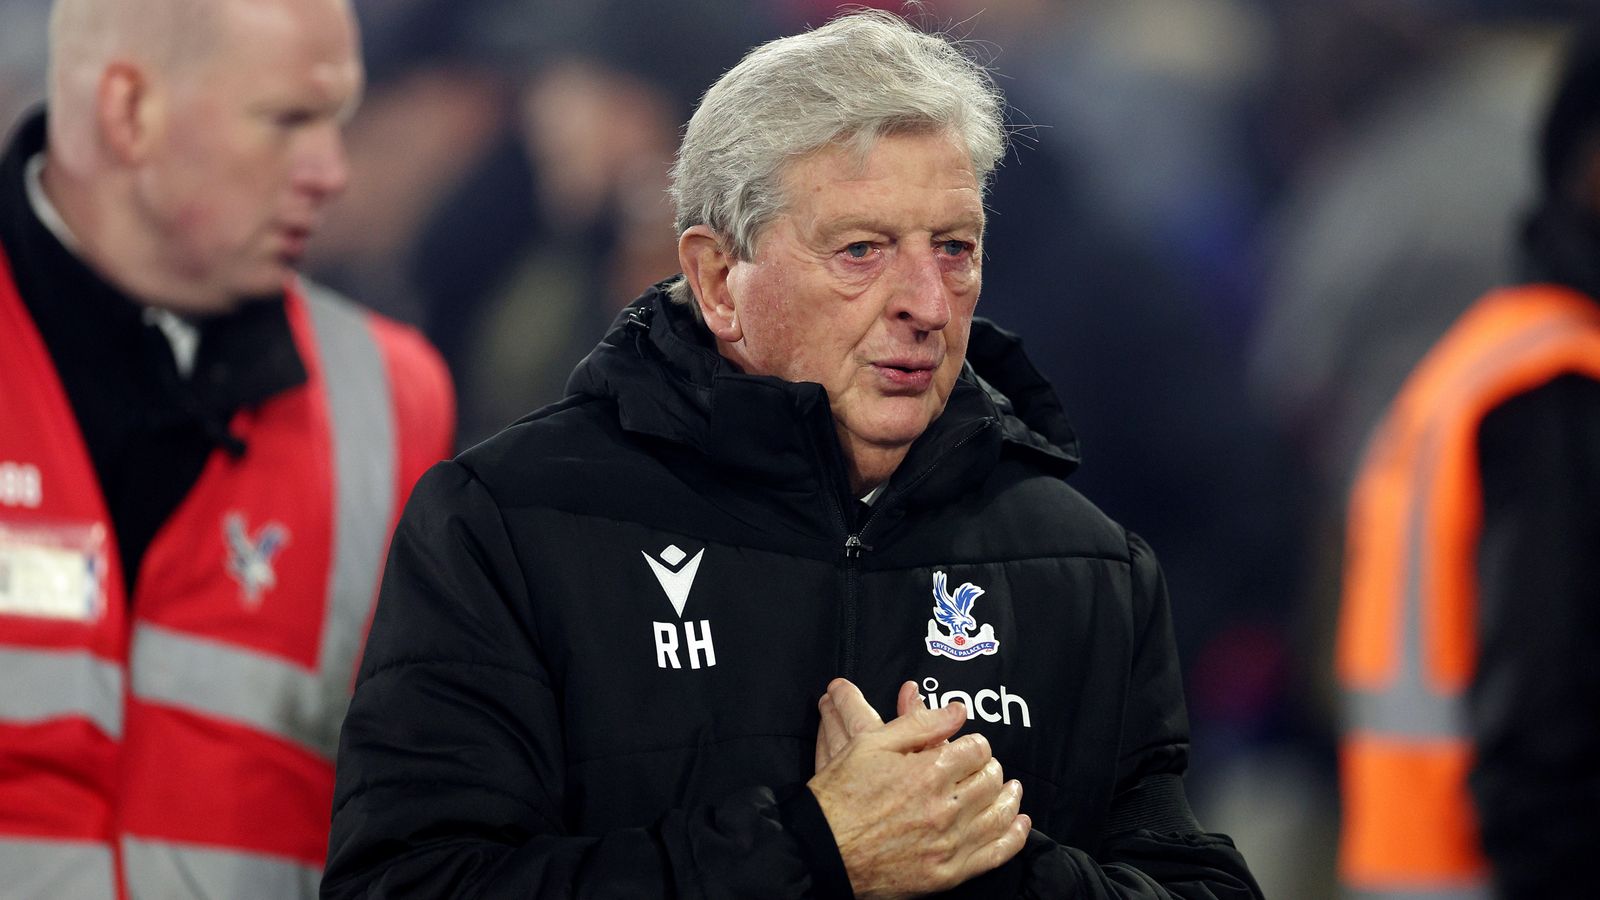 Crystal Palace manager Roy Hodgson 'bitterly regrets' saying club's fans have been spoilt – Sky Sports